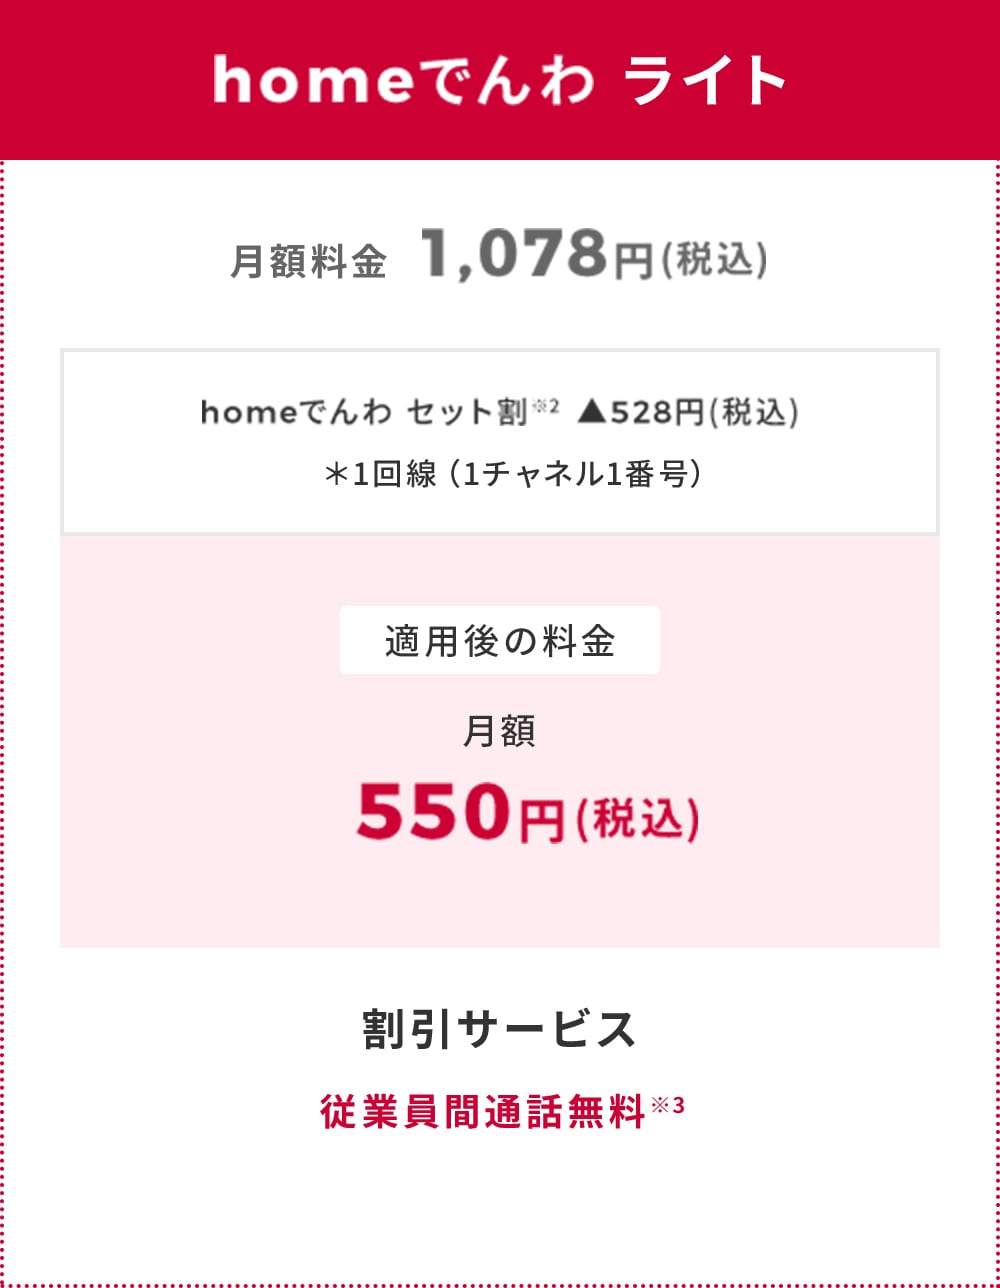 homeでんわ ライト